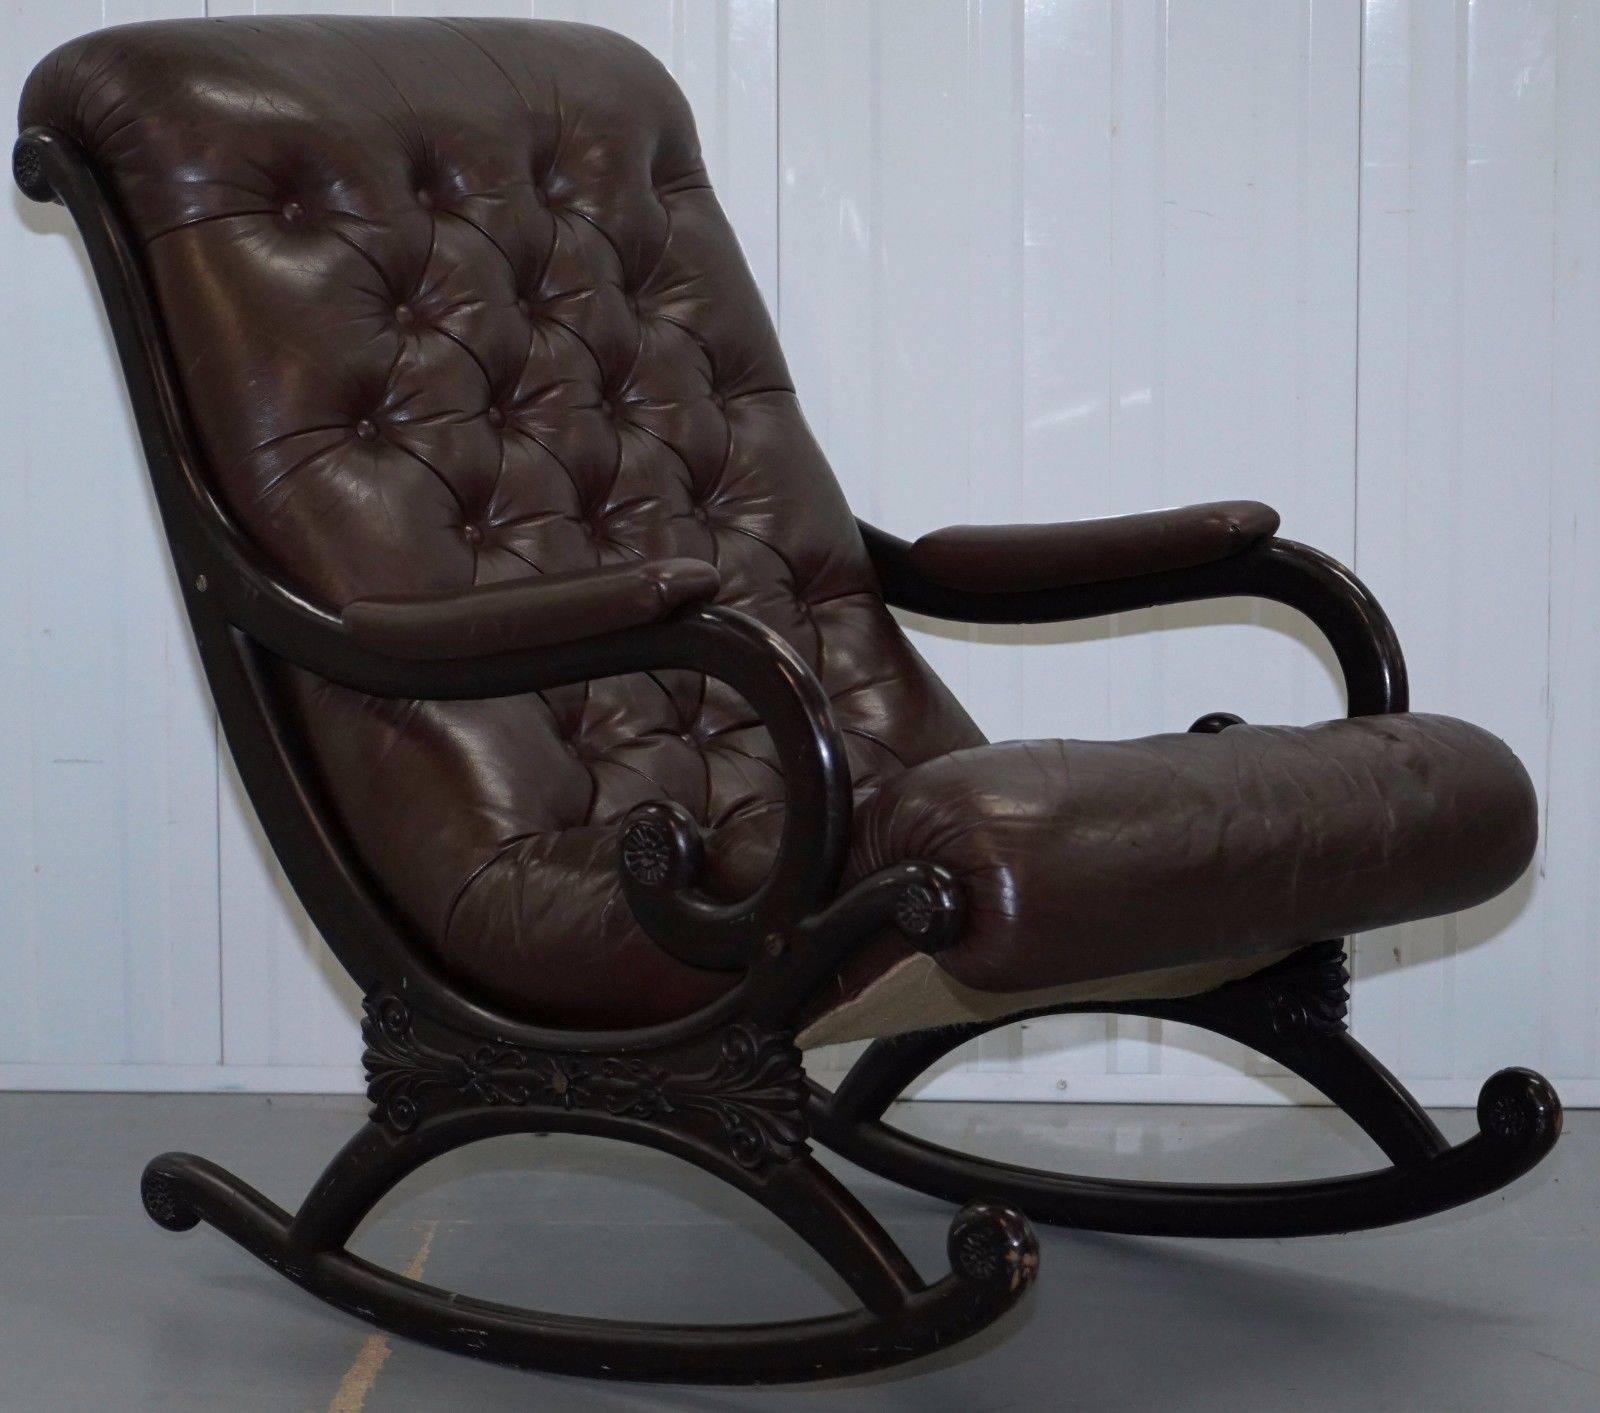 We are delighted to offer for sale this lovely vintage 1970's danish Chesterfield aged brown leather slipper rocking armchair

A well-used vintage piece in nice condition throughout, the leather has a lovely patina, the general look and feel of